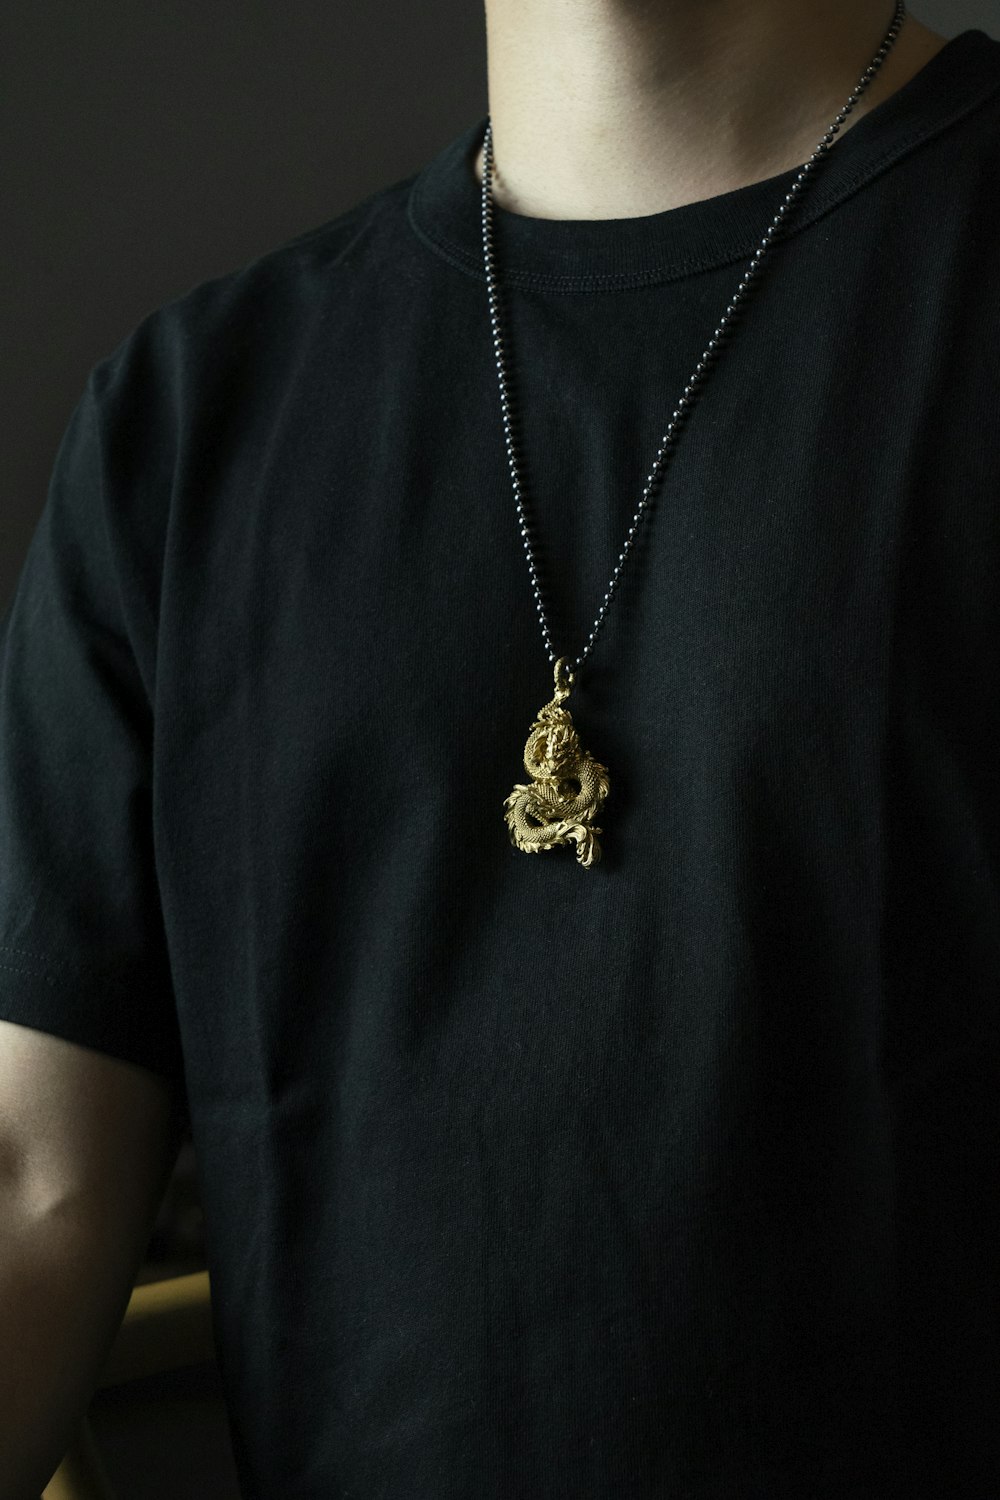 A guest wears gold chain necklaces, a black shirt, a black embossed News  Photo - Getty Images